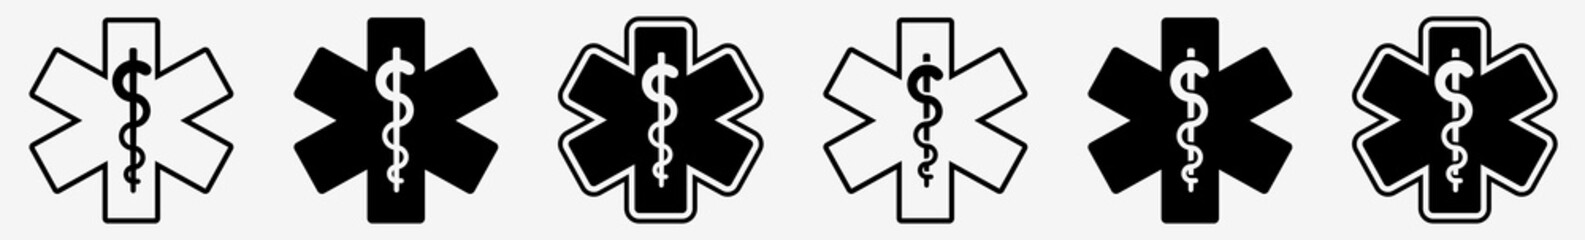 Emergency Medical Service Symbol Set | EMS Emergency Medical Service Vector Illustration Logo | Medical Icons Isolated Collection